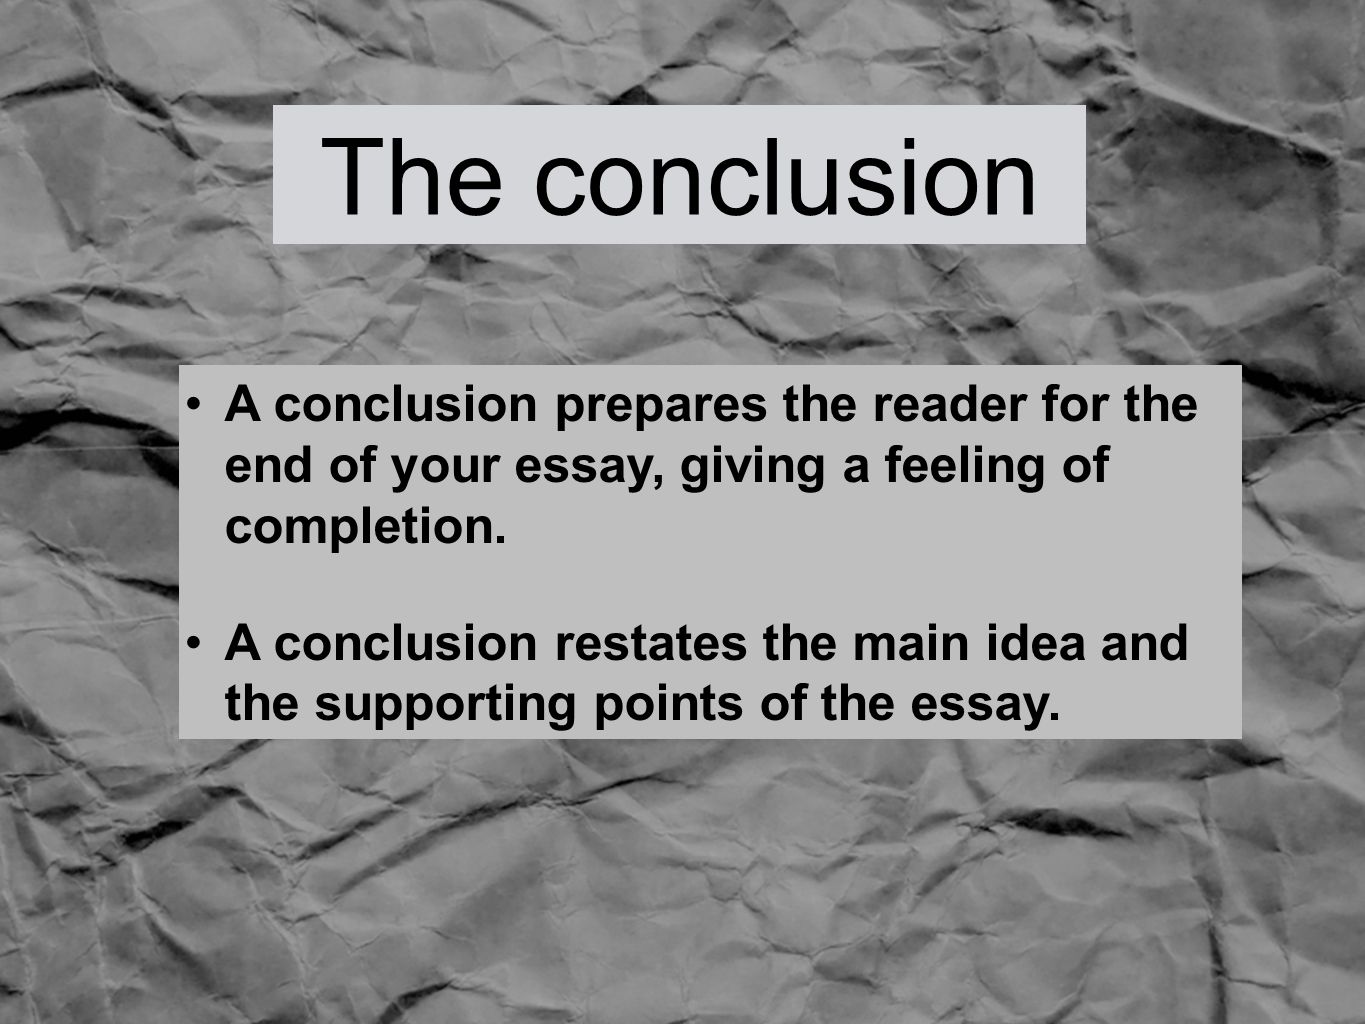 The conclusion A conclusion prepares the reader for the end of your essay, giving a feeling of completion.